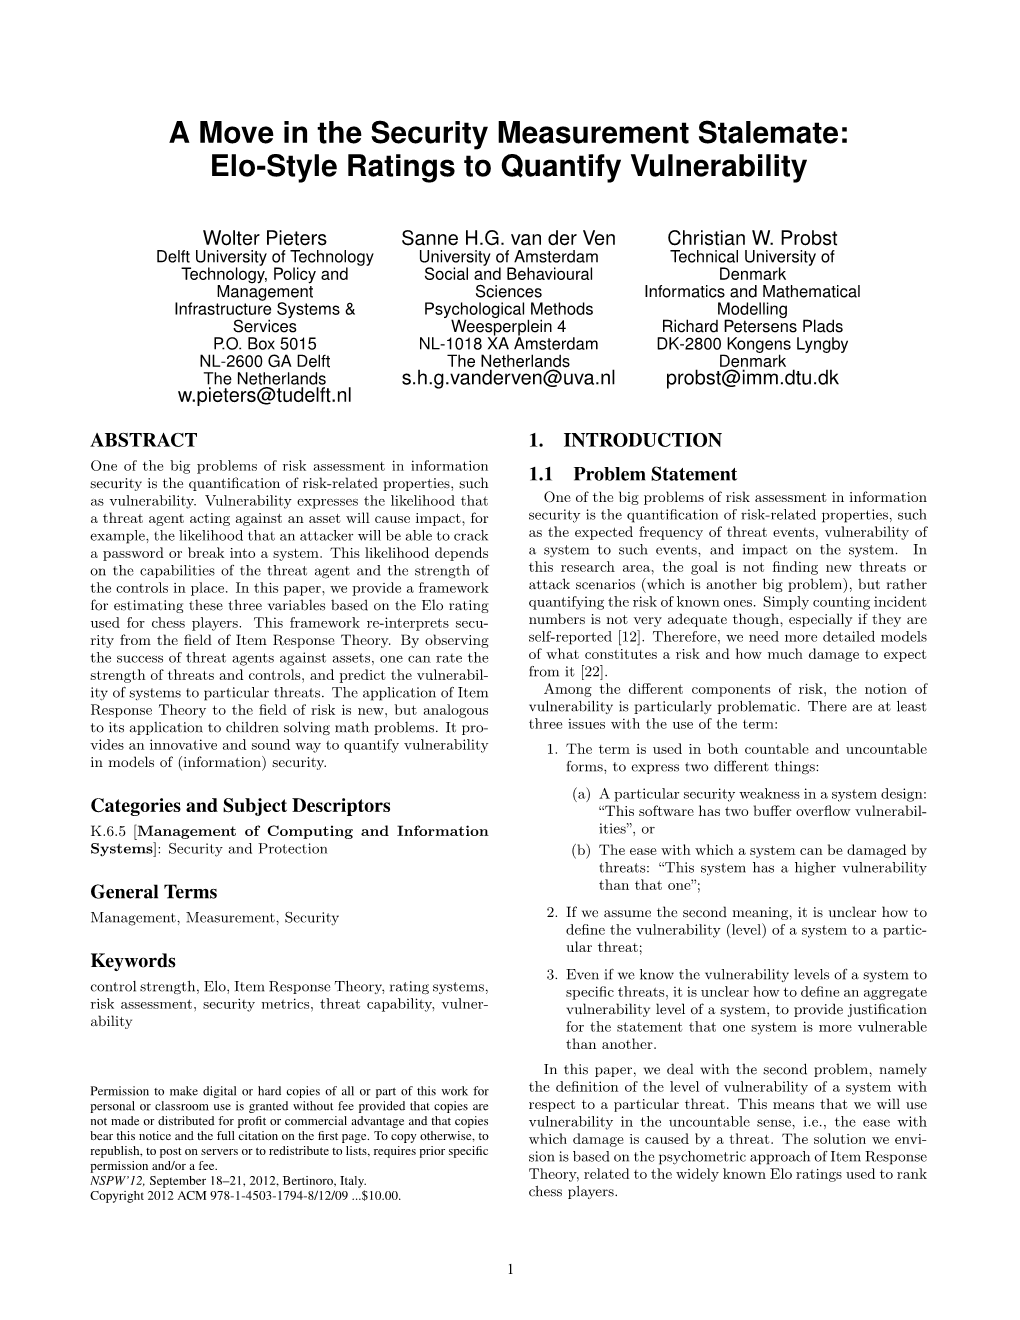 Elo-Style Ratings to Quantify Vulnerability